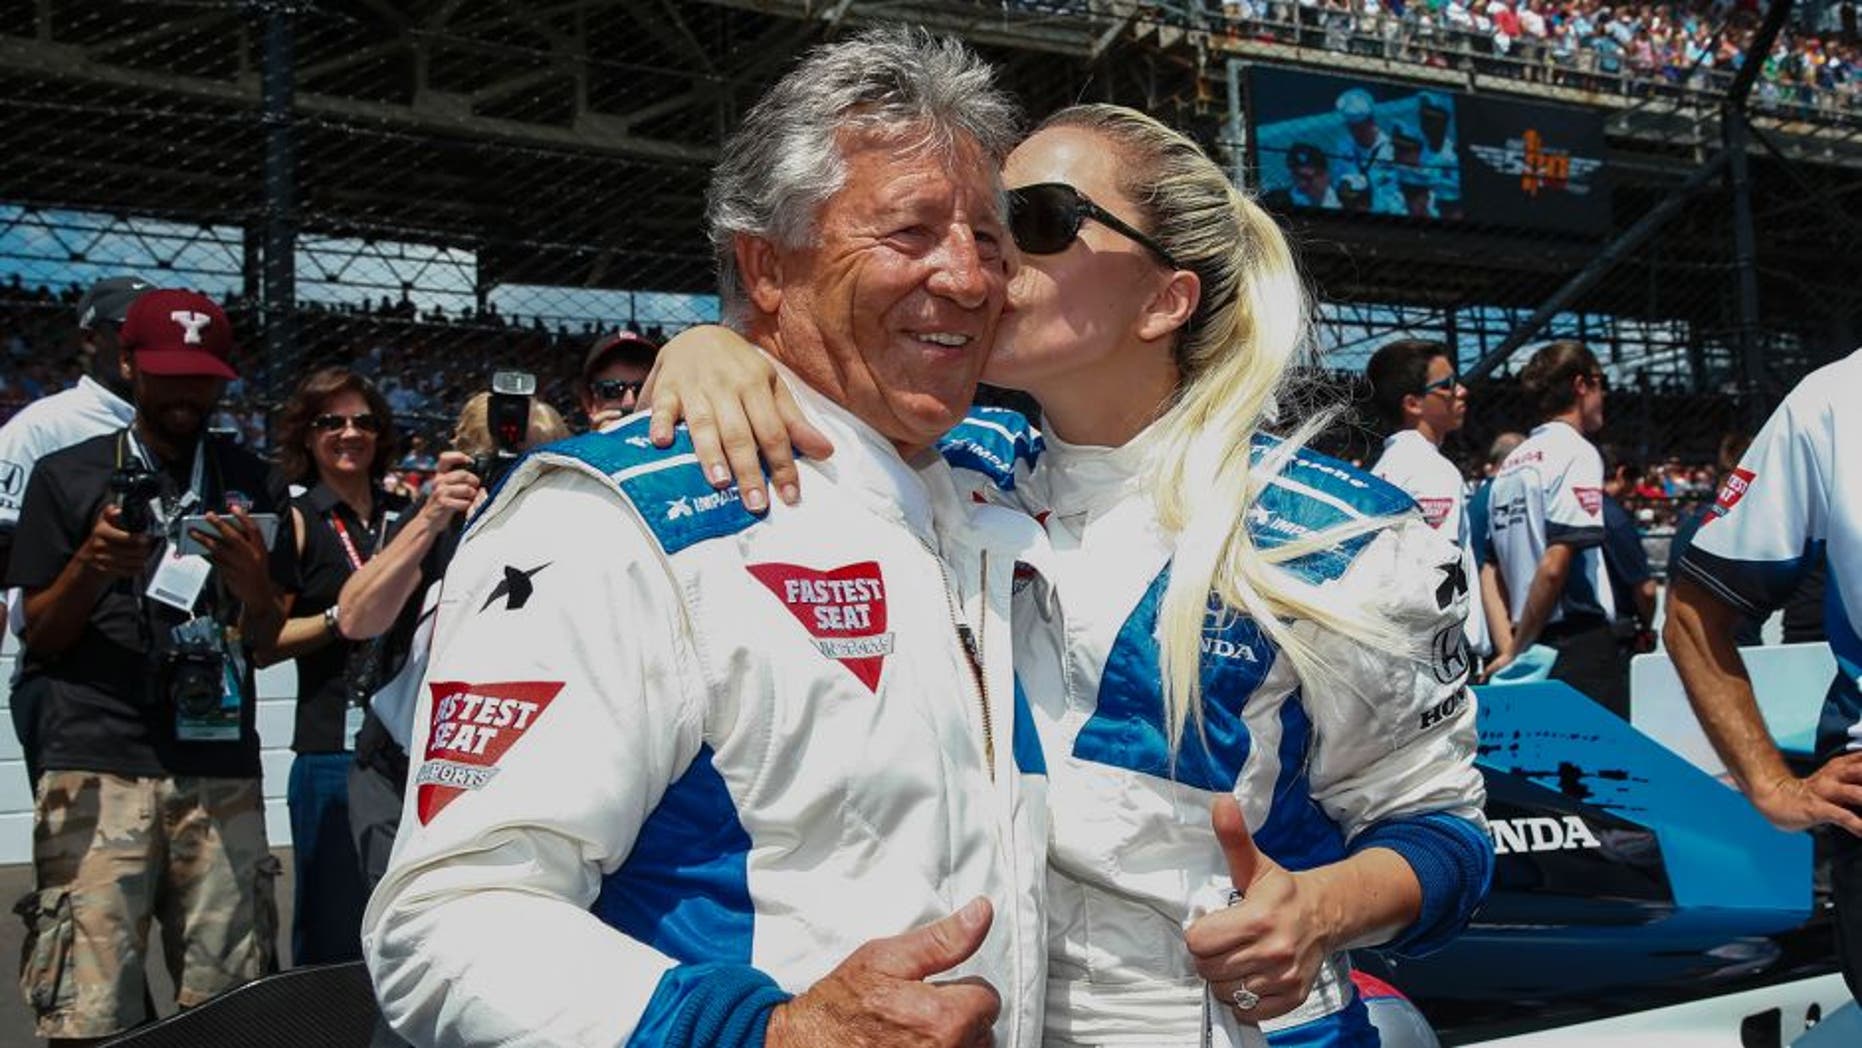 Lady Gaga Gets Ride With Mario Andretti At Indy 500 Fox News 